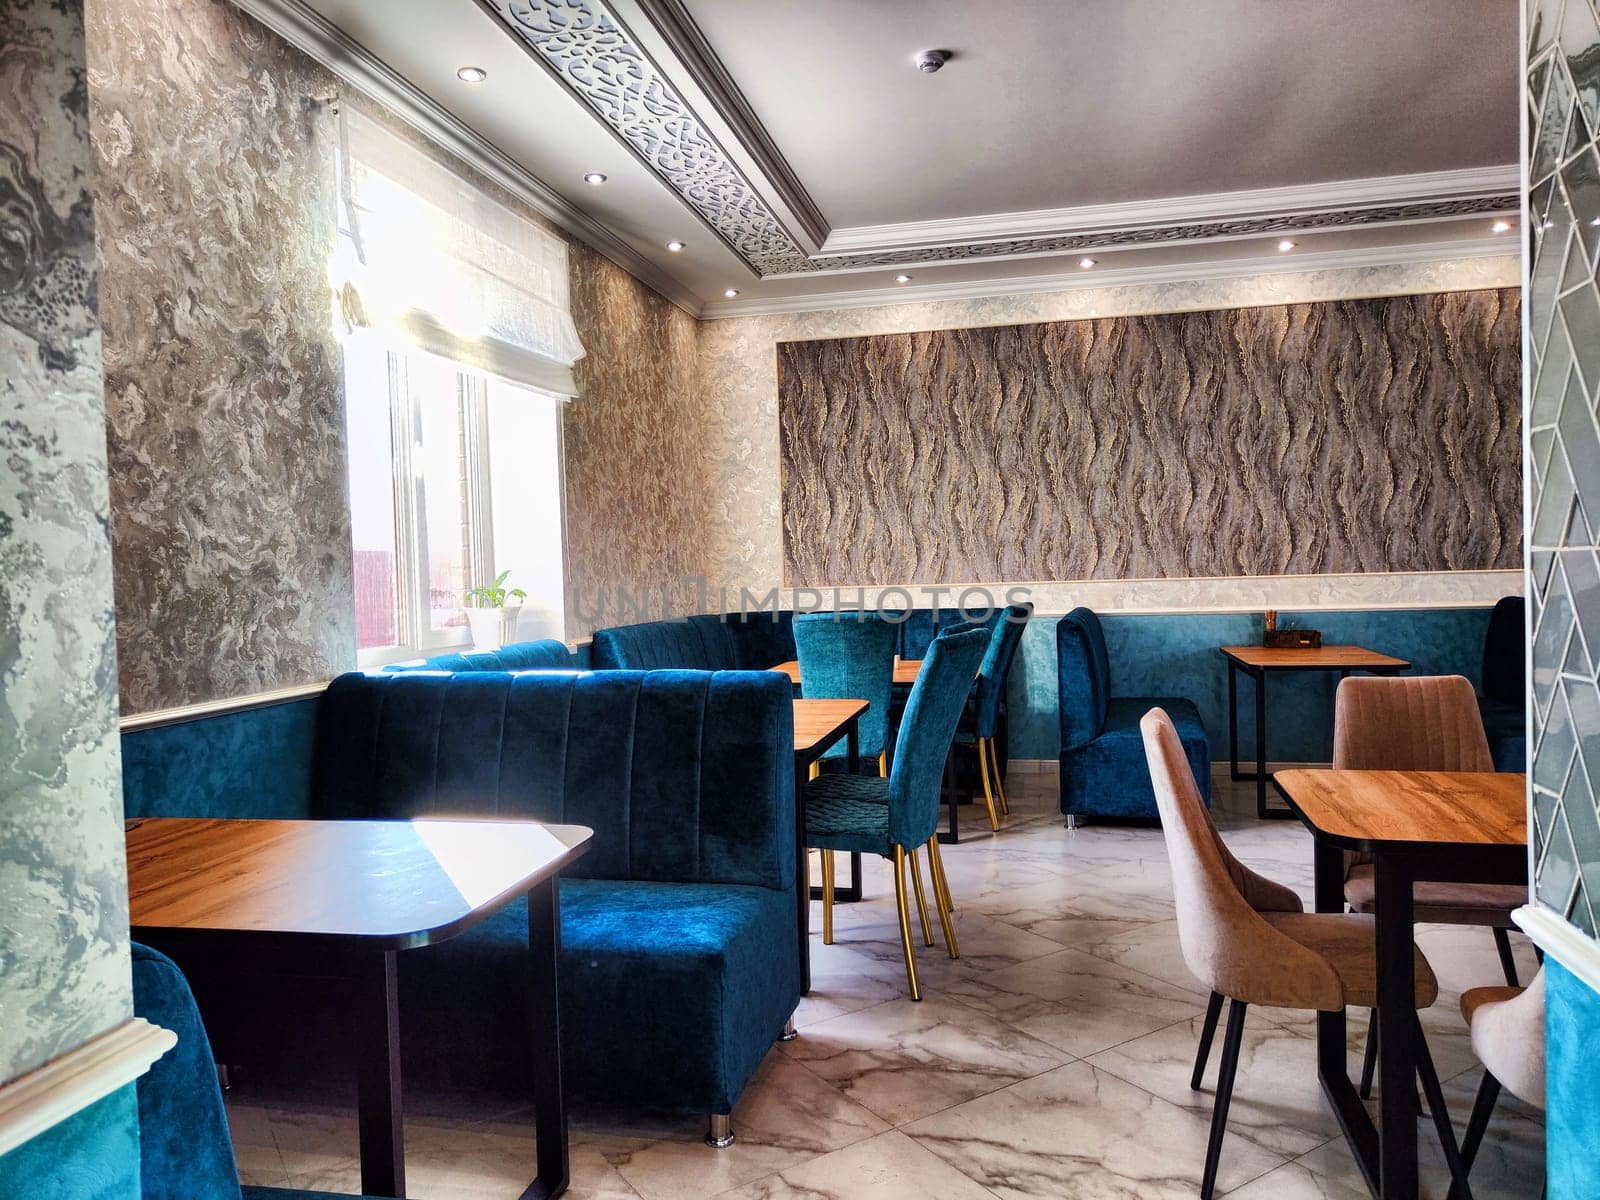 Elegant Restaurant Interior With Plush Seating and Natural Light. A cozy and stylish dining area with blue velvet chairs by keleny